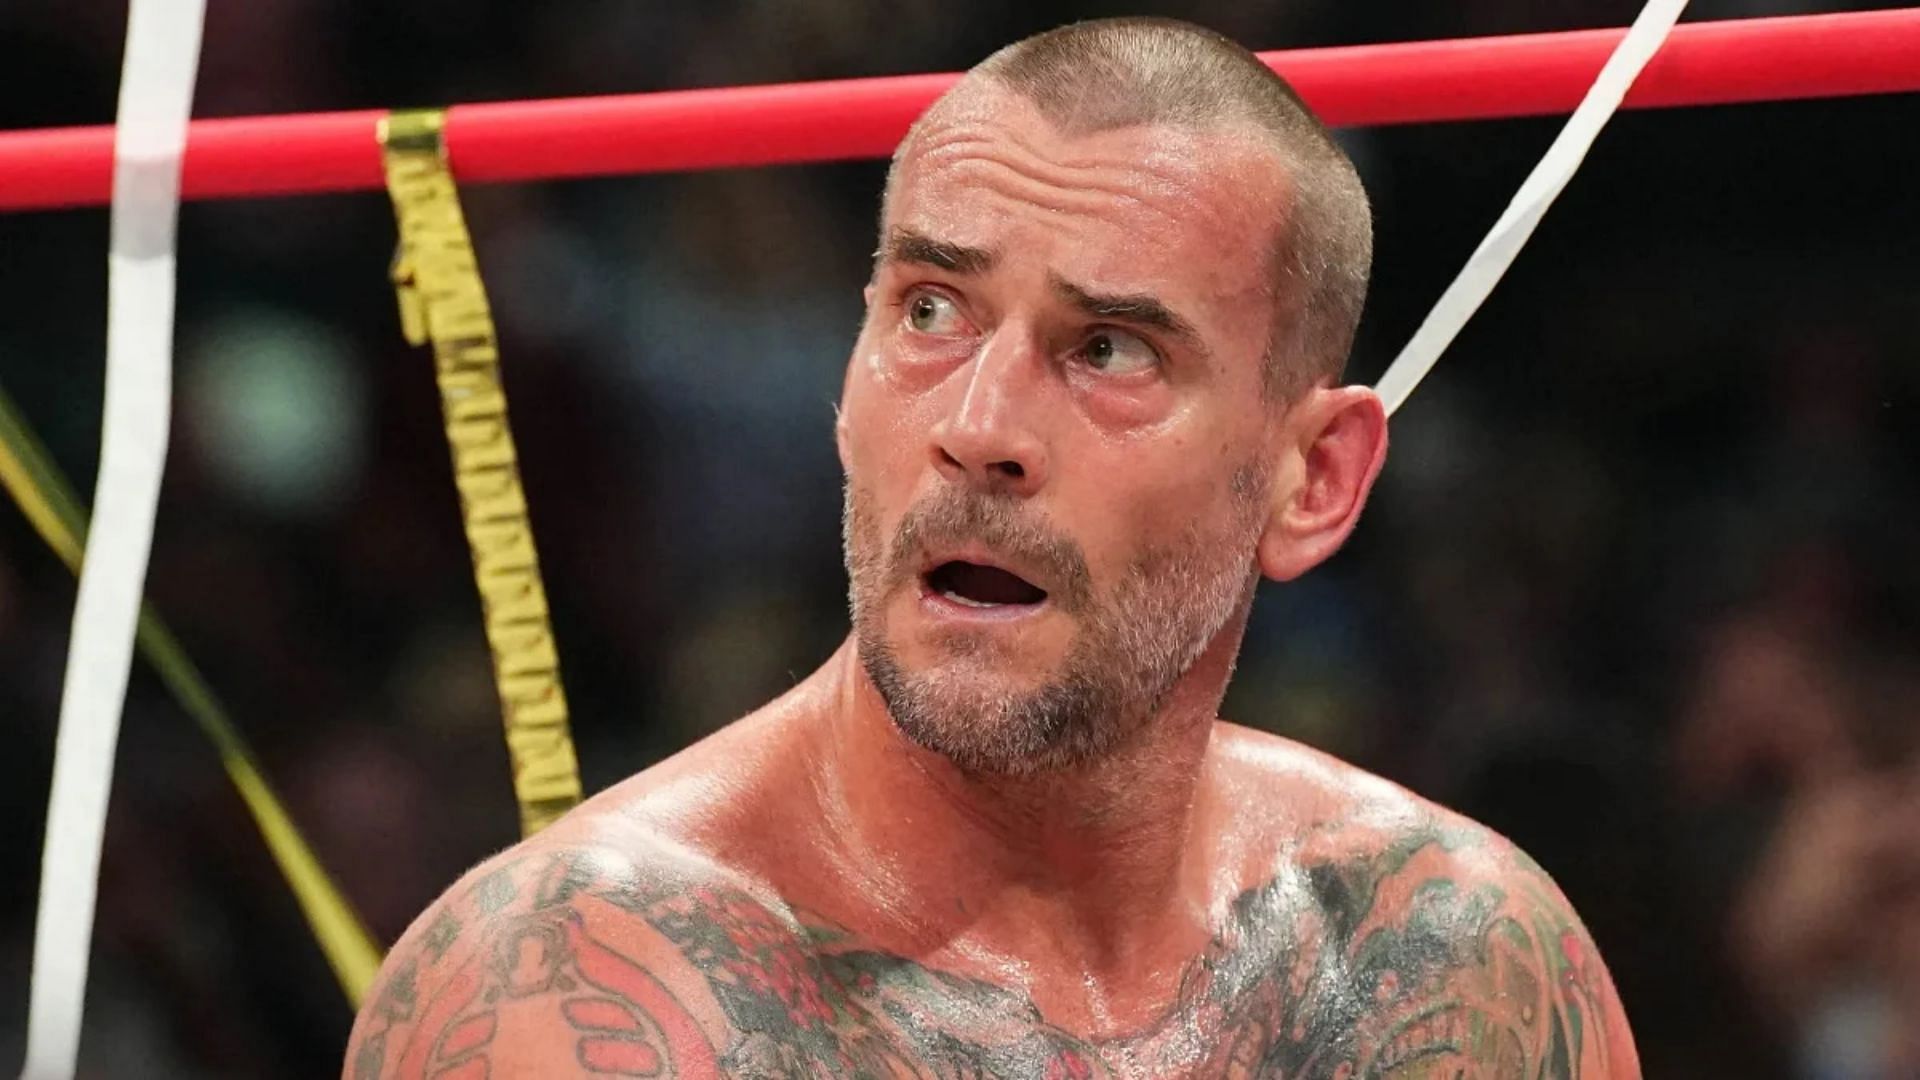 CM Punk is a former AEW and WWE World Champion